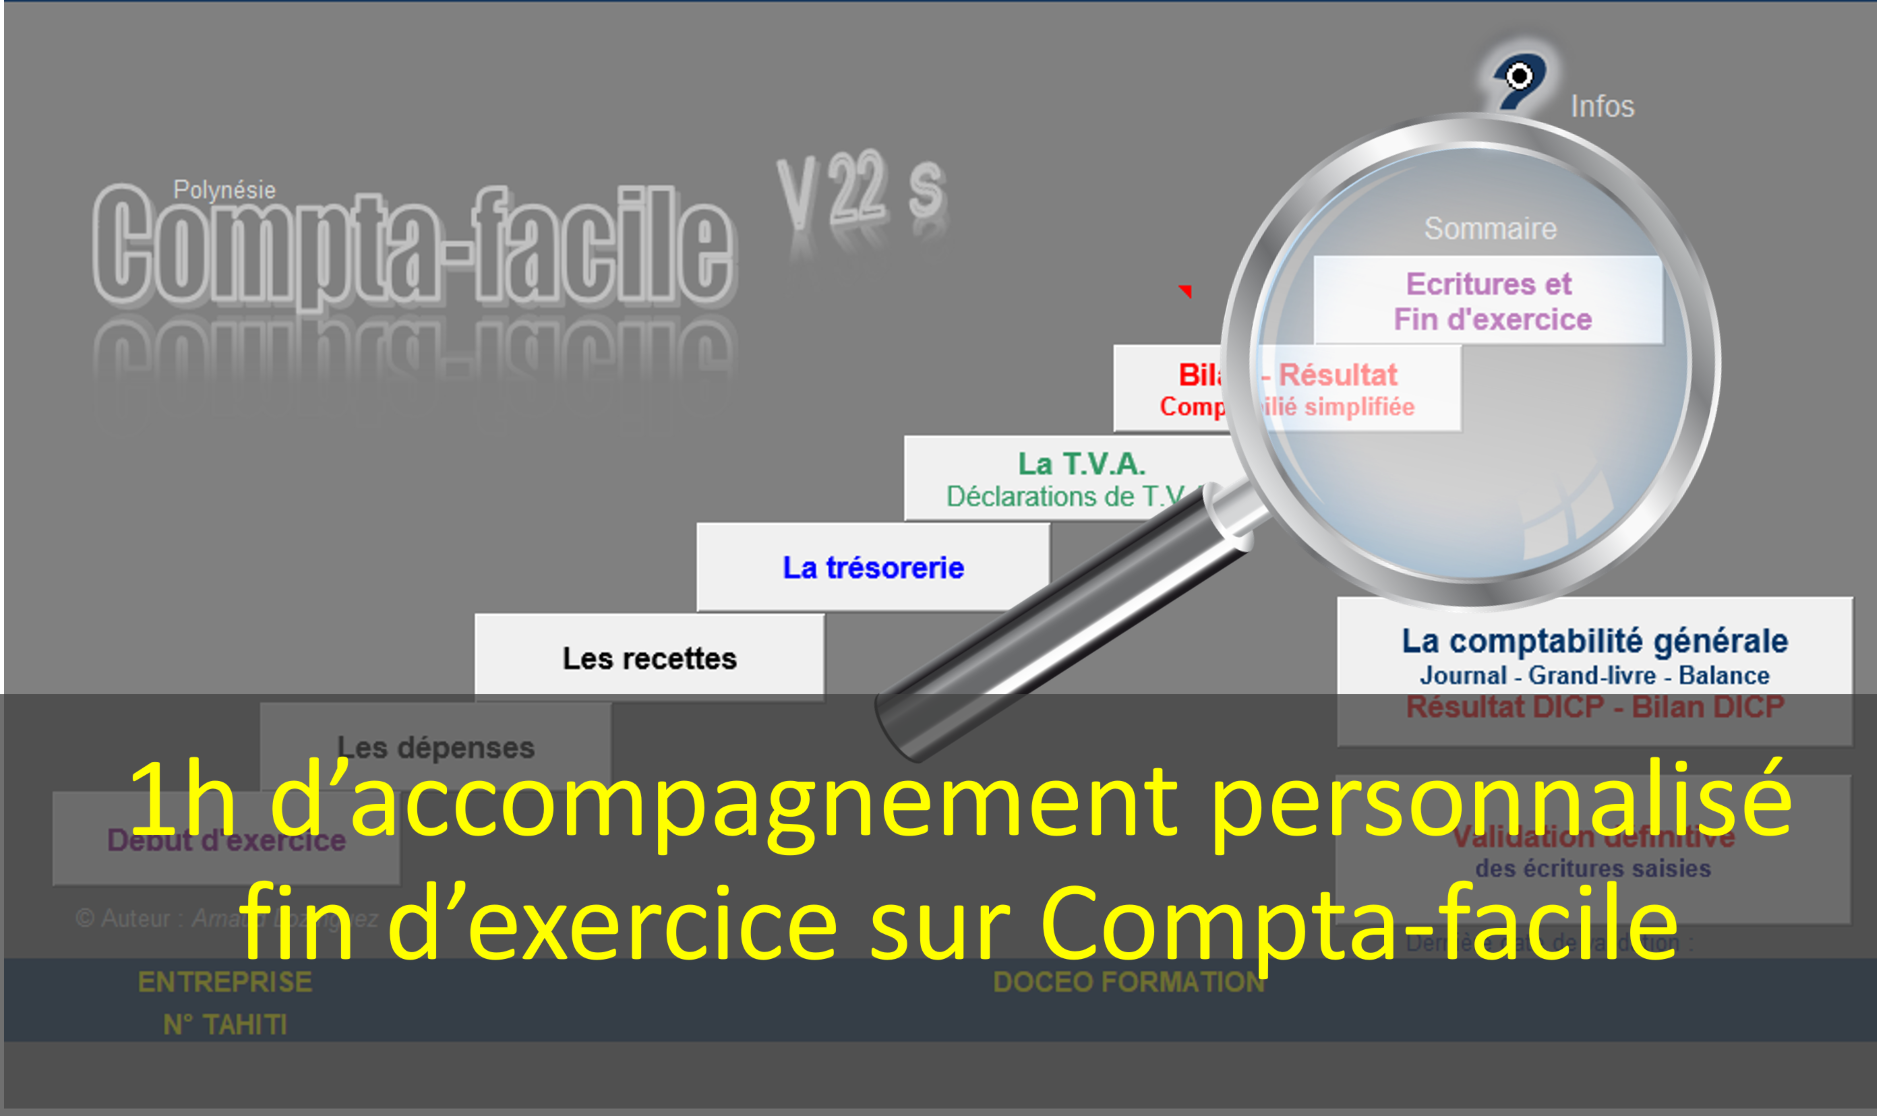 Accompagnement personnalisé DOCEO